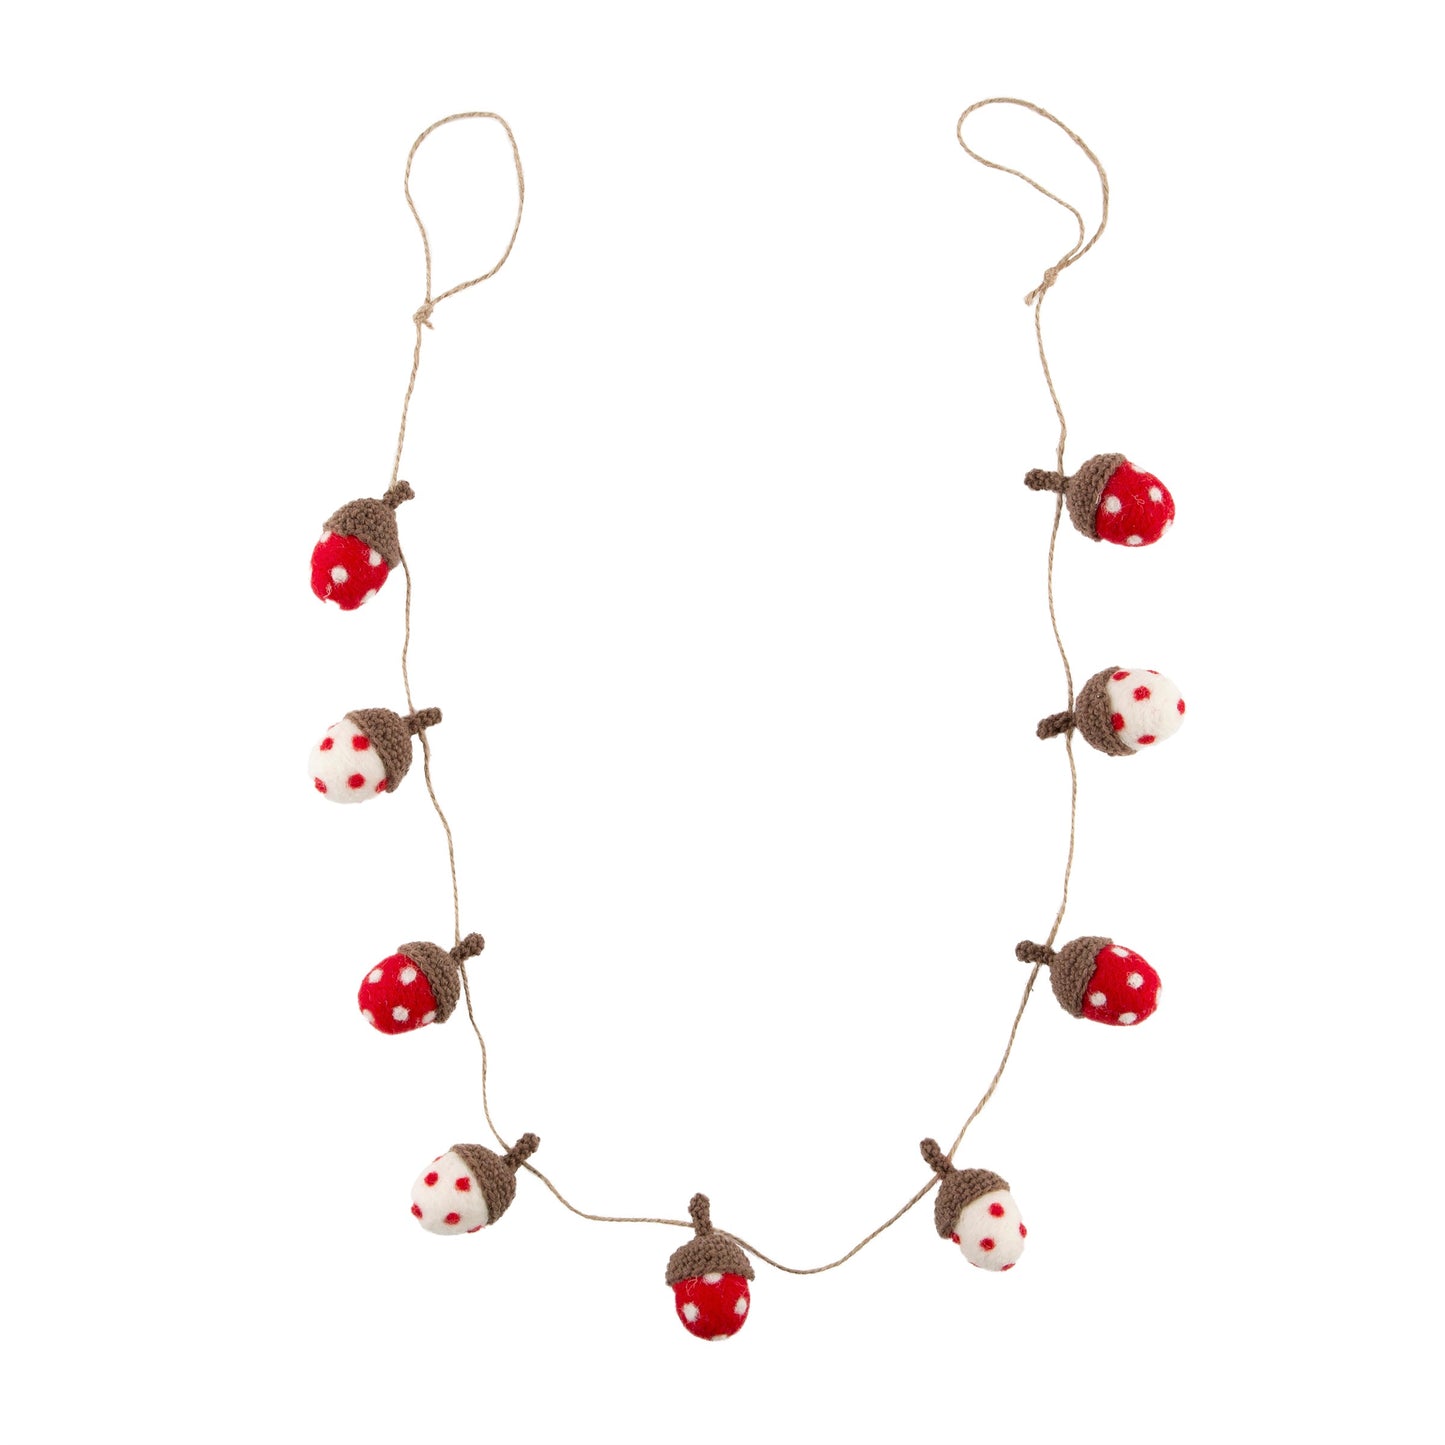 This beautiful, red & white polka dotted woodland acorn hanging garland will add some magic to your festive decorations this winter!